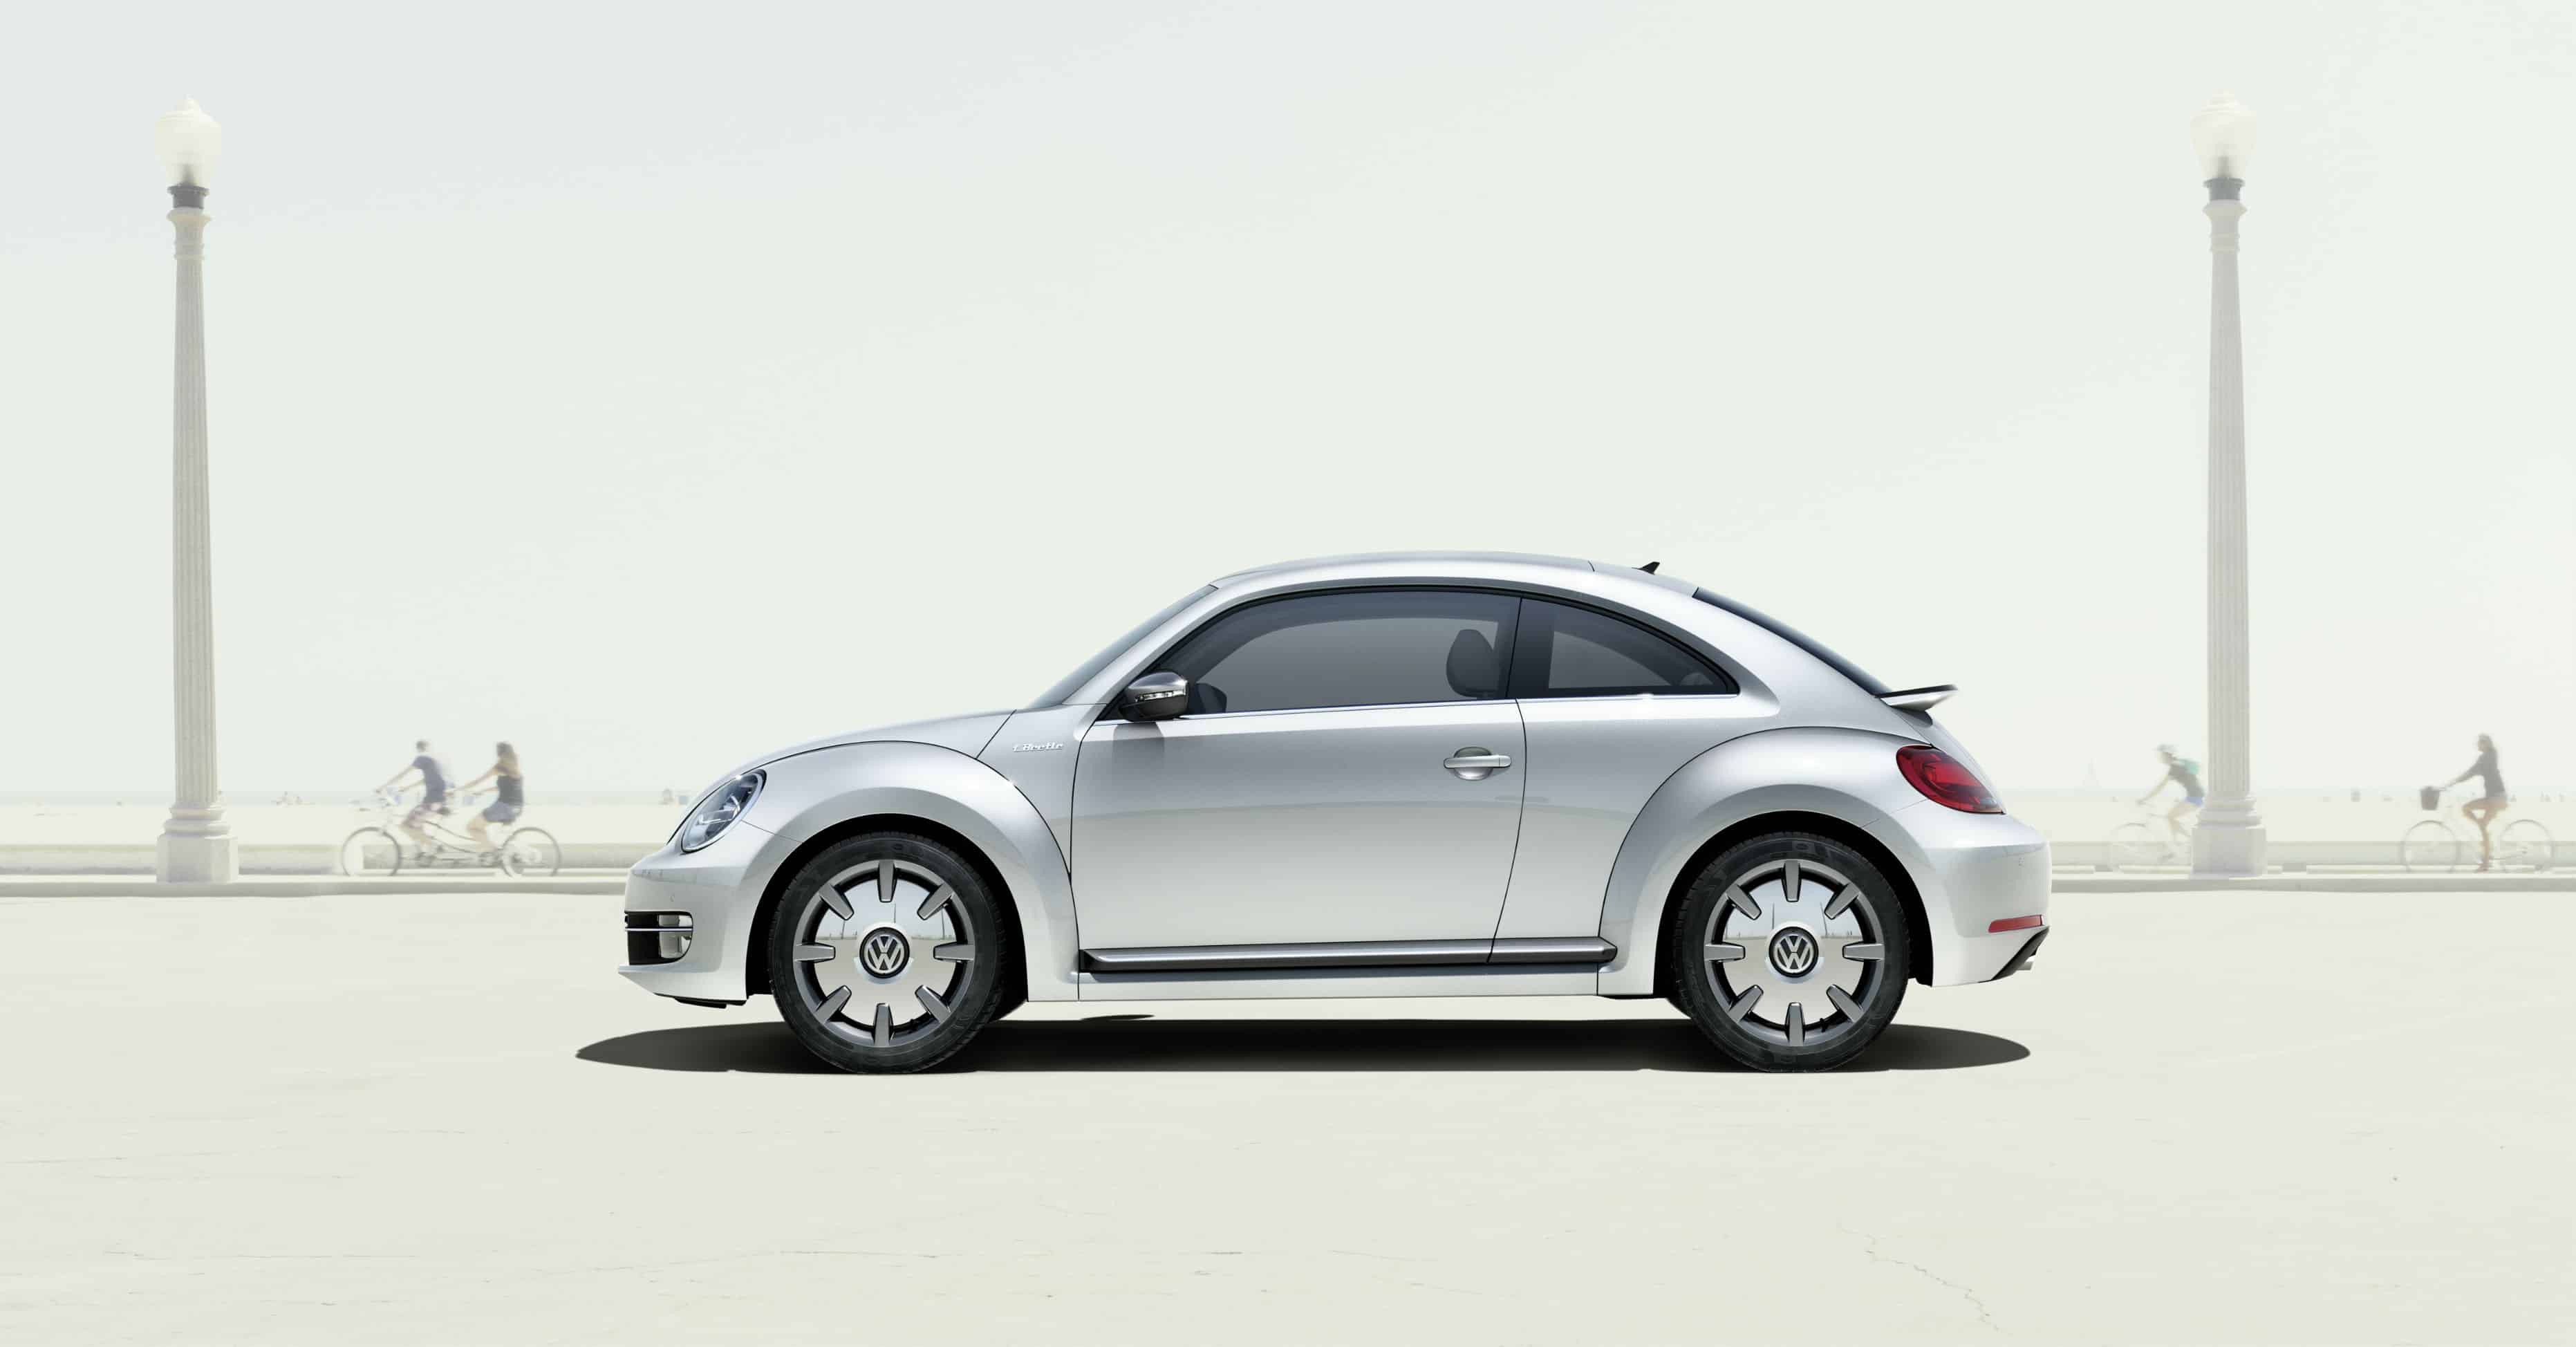 The first Apple car, a collaboration with VW known as the iBeetle, rolls onto the scene.